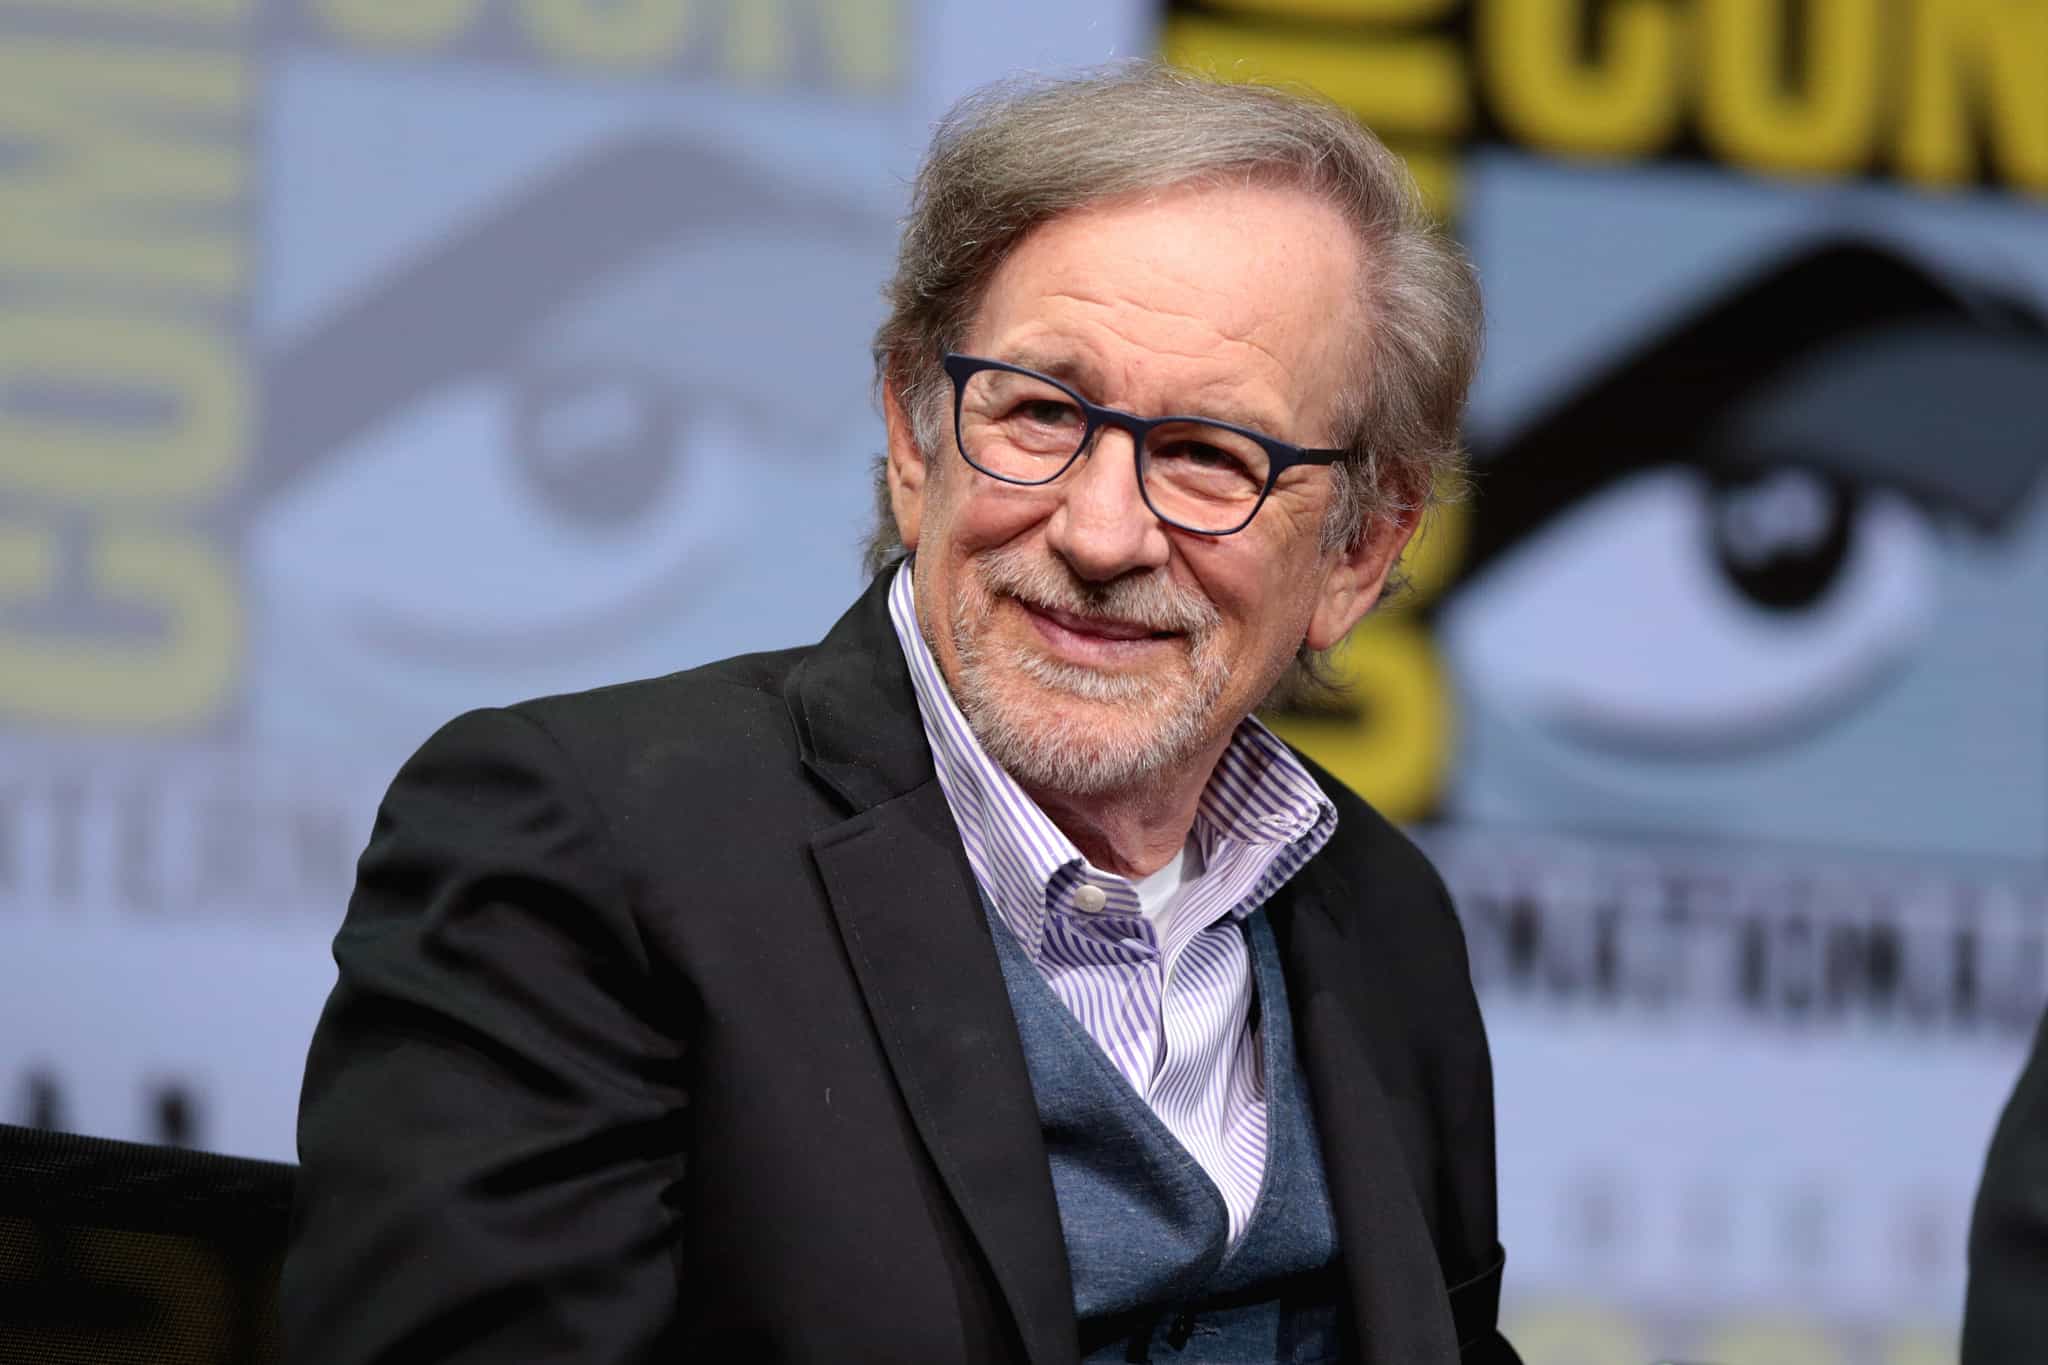 Steven Spielberg takes the stage at Comic-Con International in 2017.